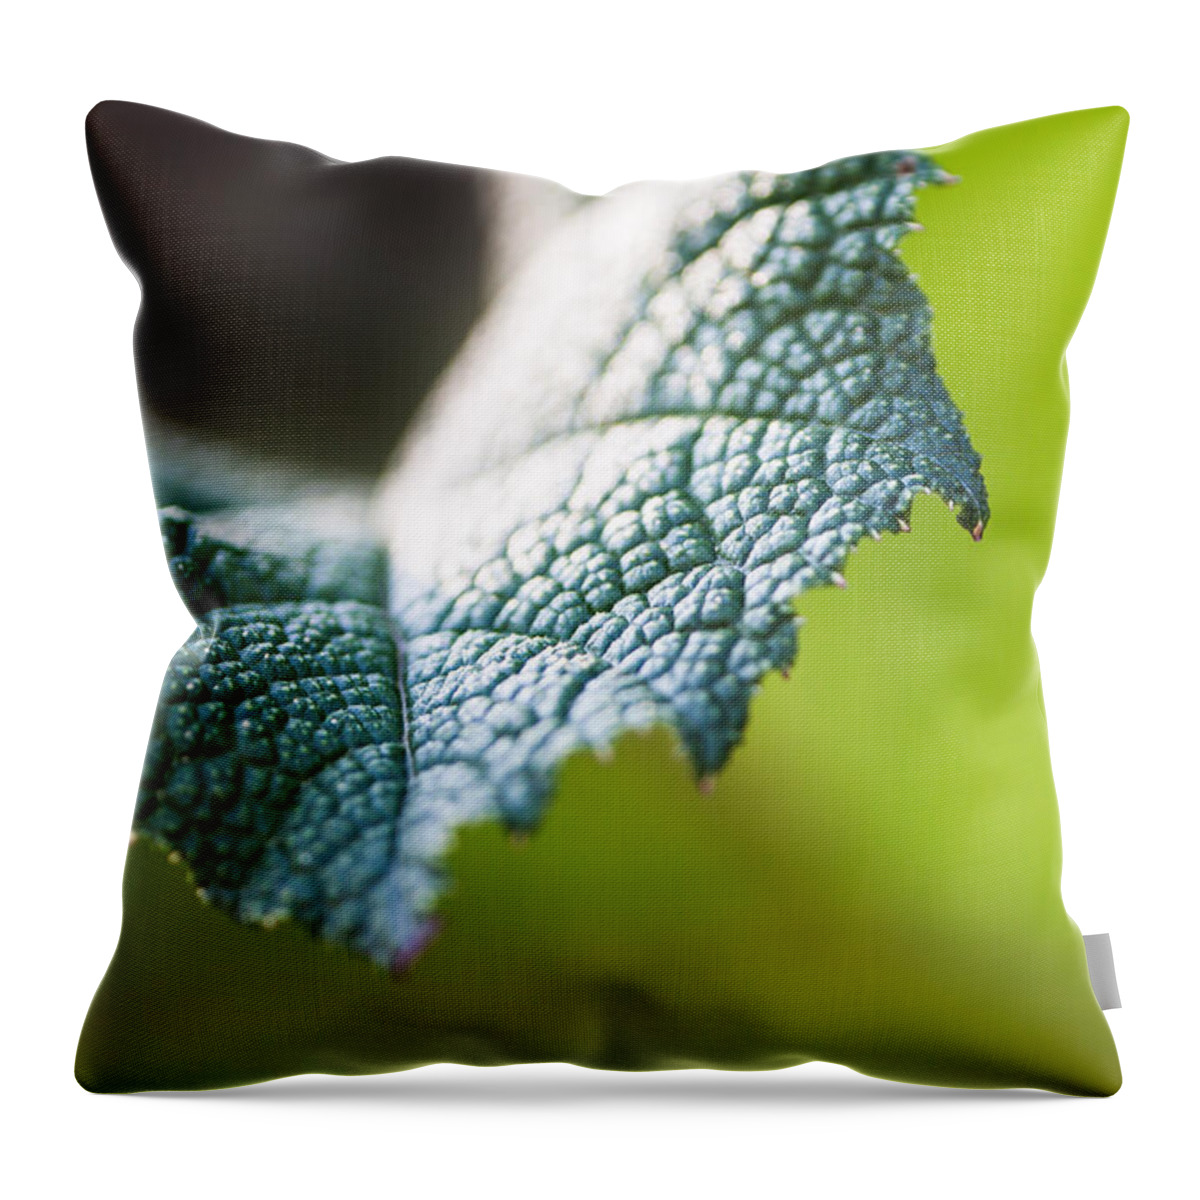 Botanical Throw Pillow featuring the photograph Slice of Leaf by John Wadleigh